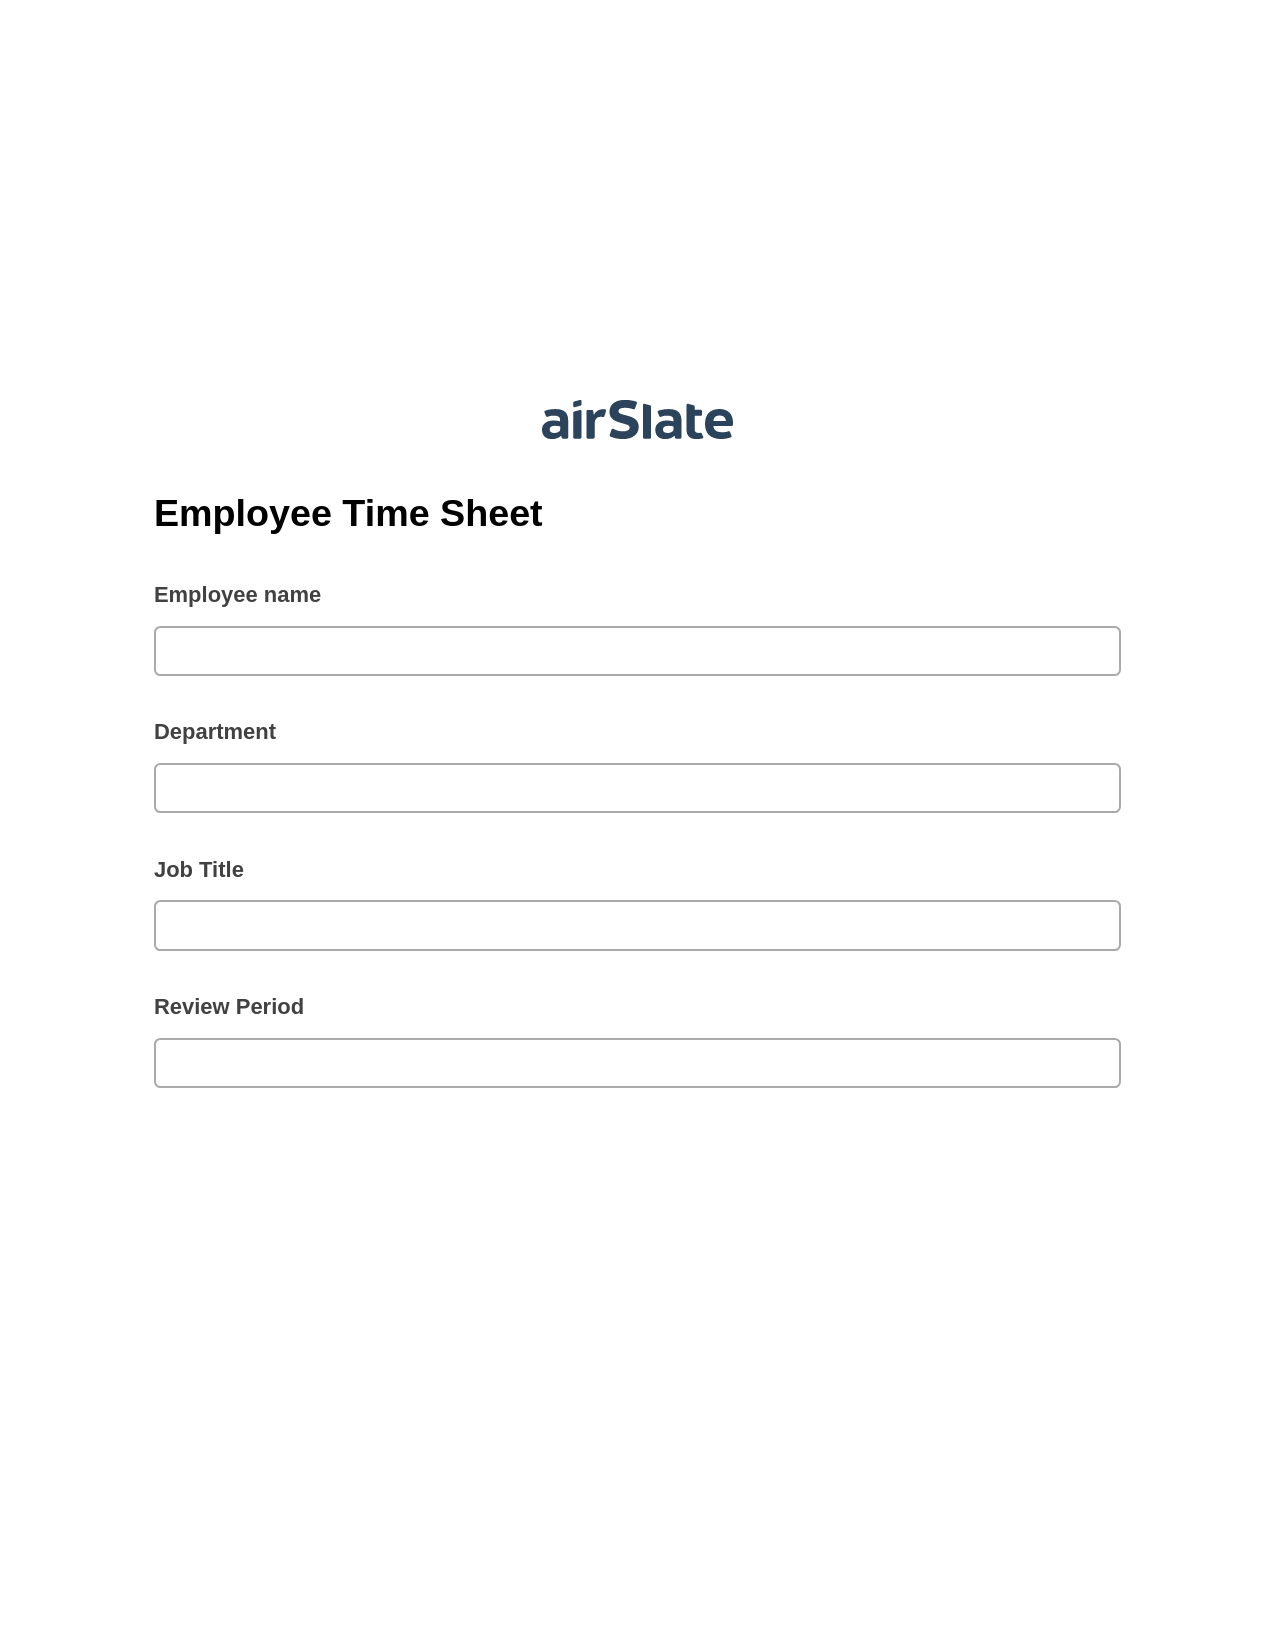 Employee Time Sheet Pre-fill from Litmos bot, Create Salesforce Records Bot, Archive to Google Drive Bot